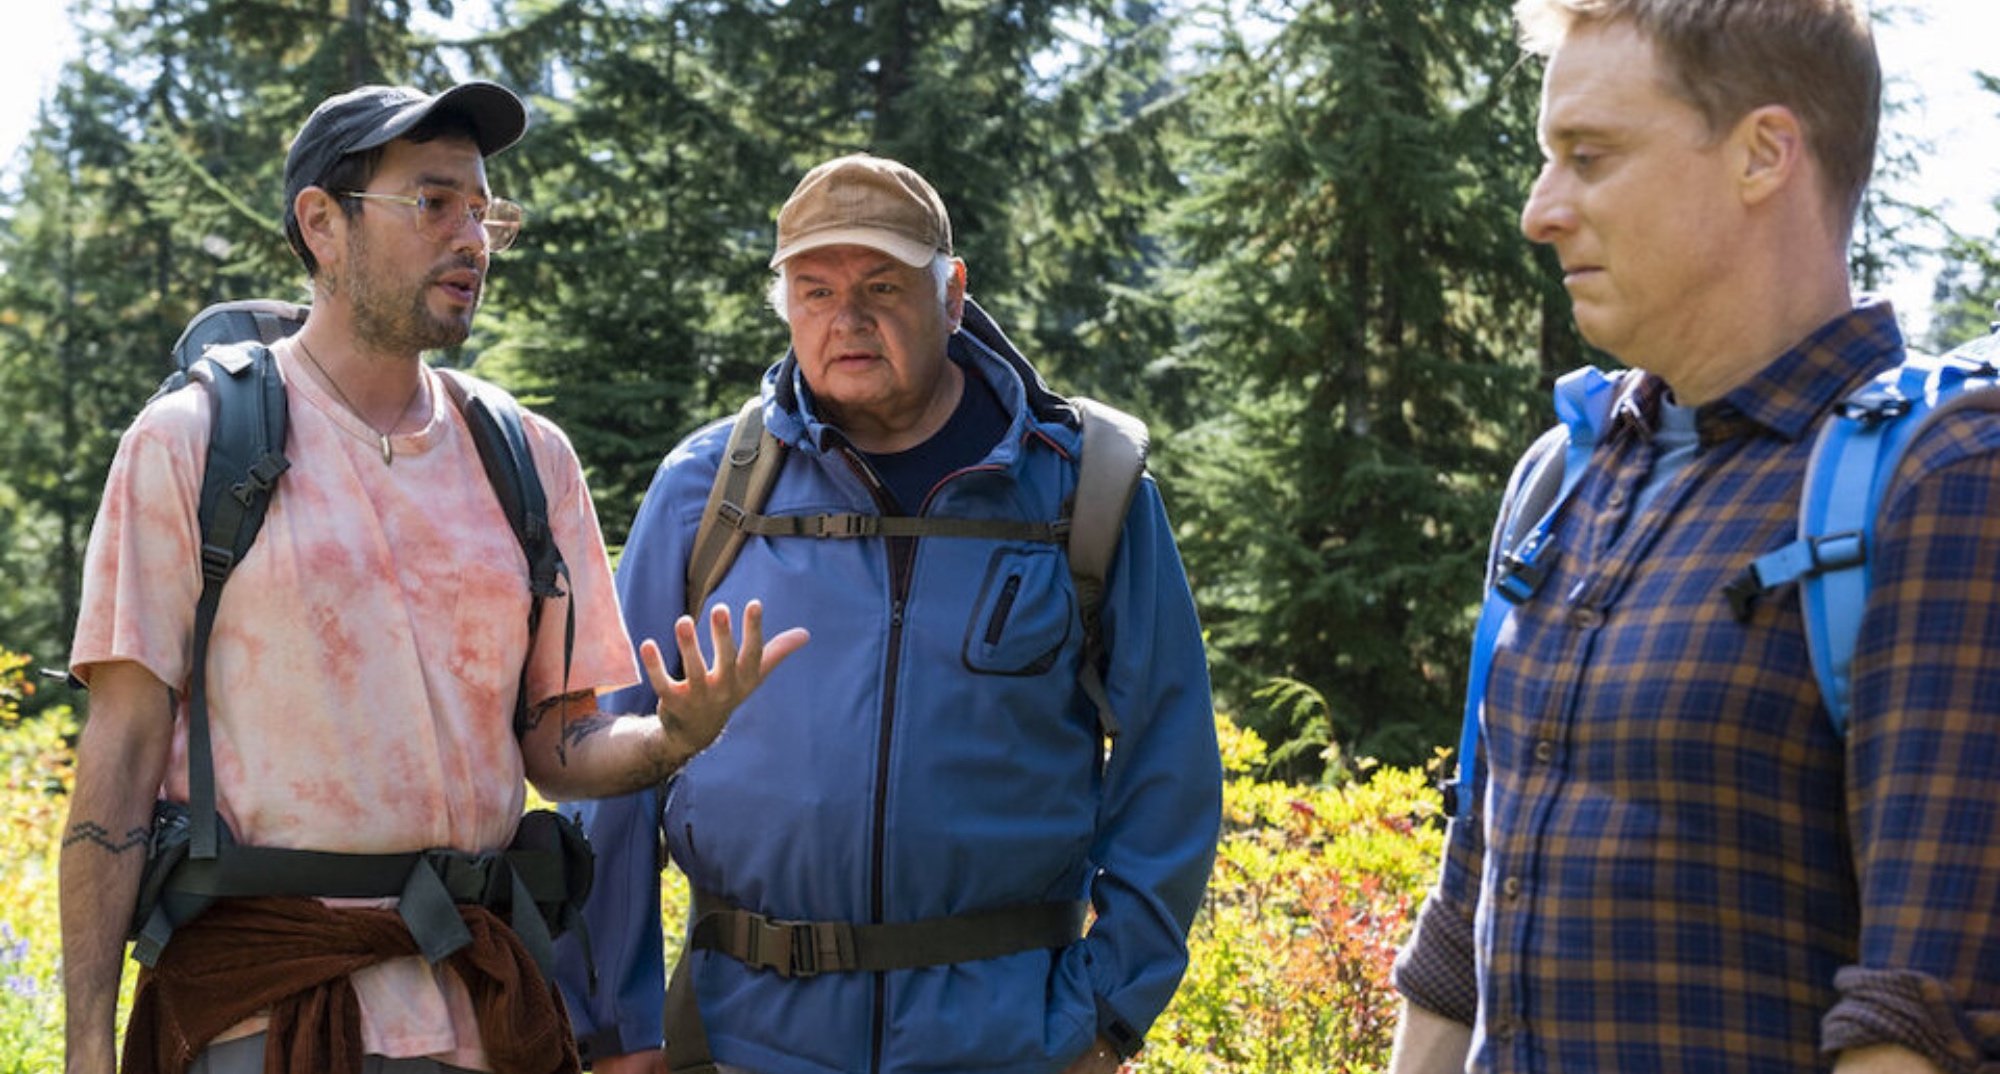 Harry and supporting characters in 'Resident Alien' Season 2 Episode 4 wearing hiking gear in woods.